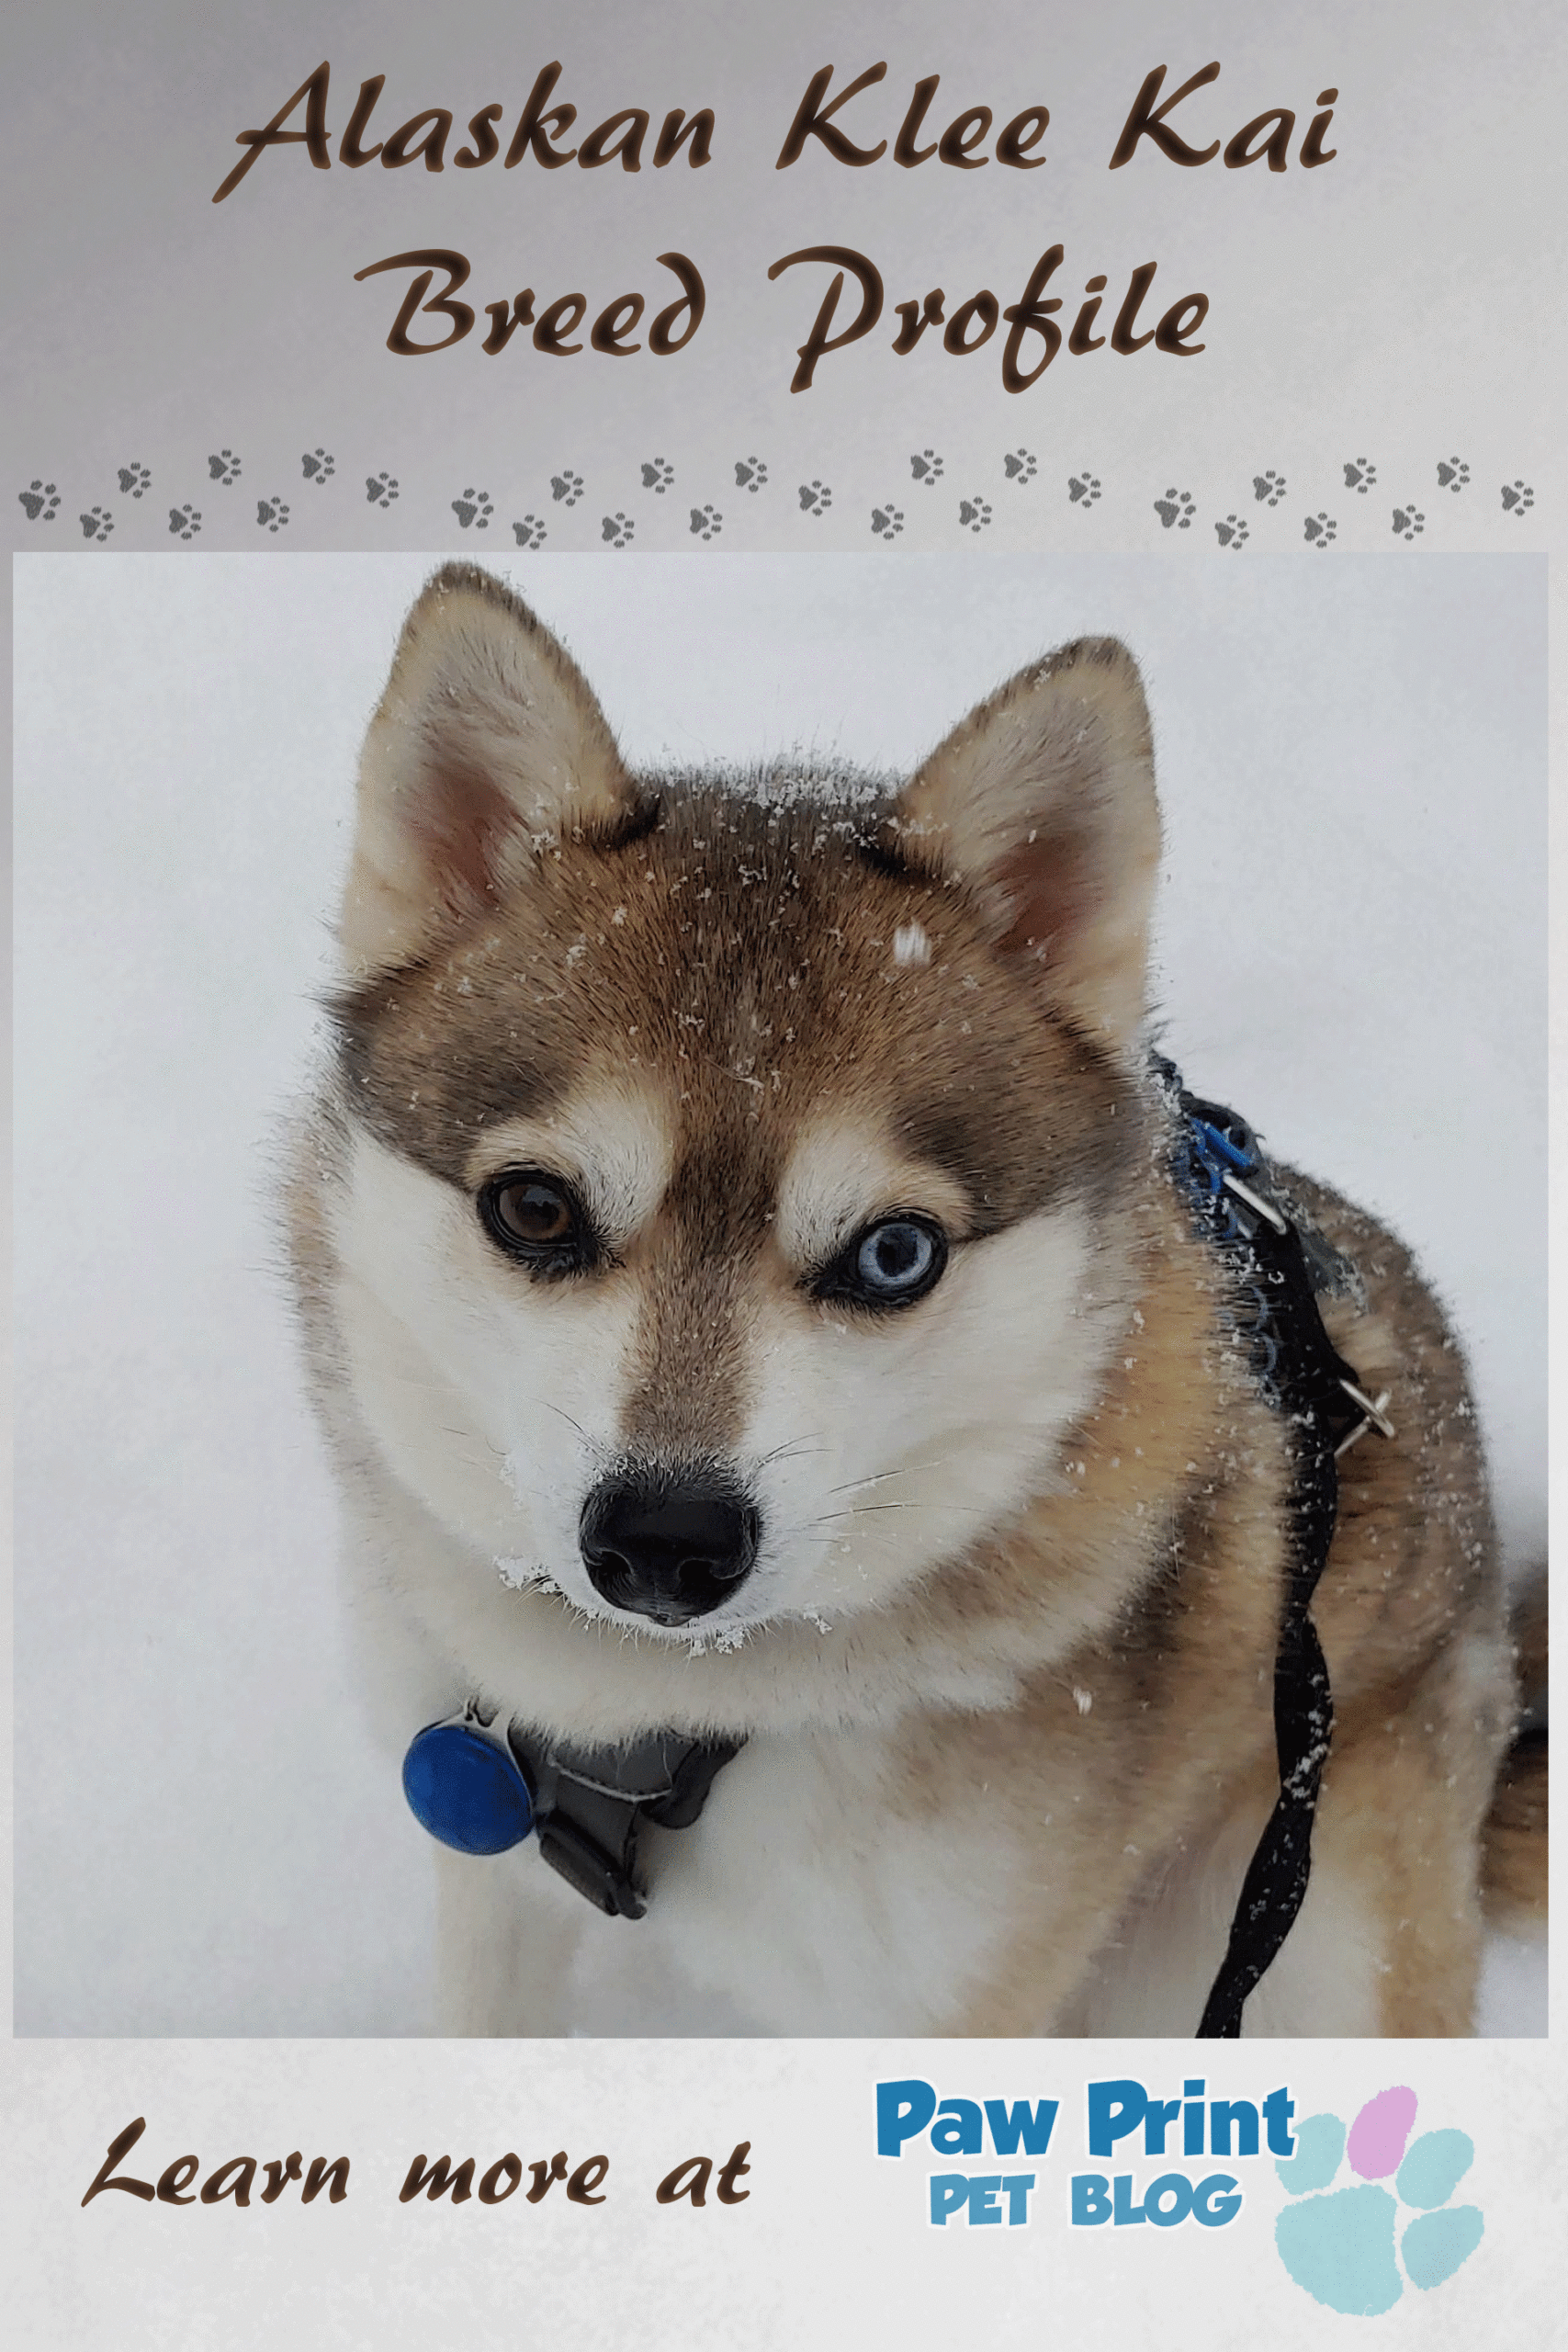 Alaskan Klee Kai Dog Breed Complete Guide - A-Z Animals